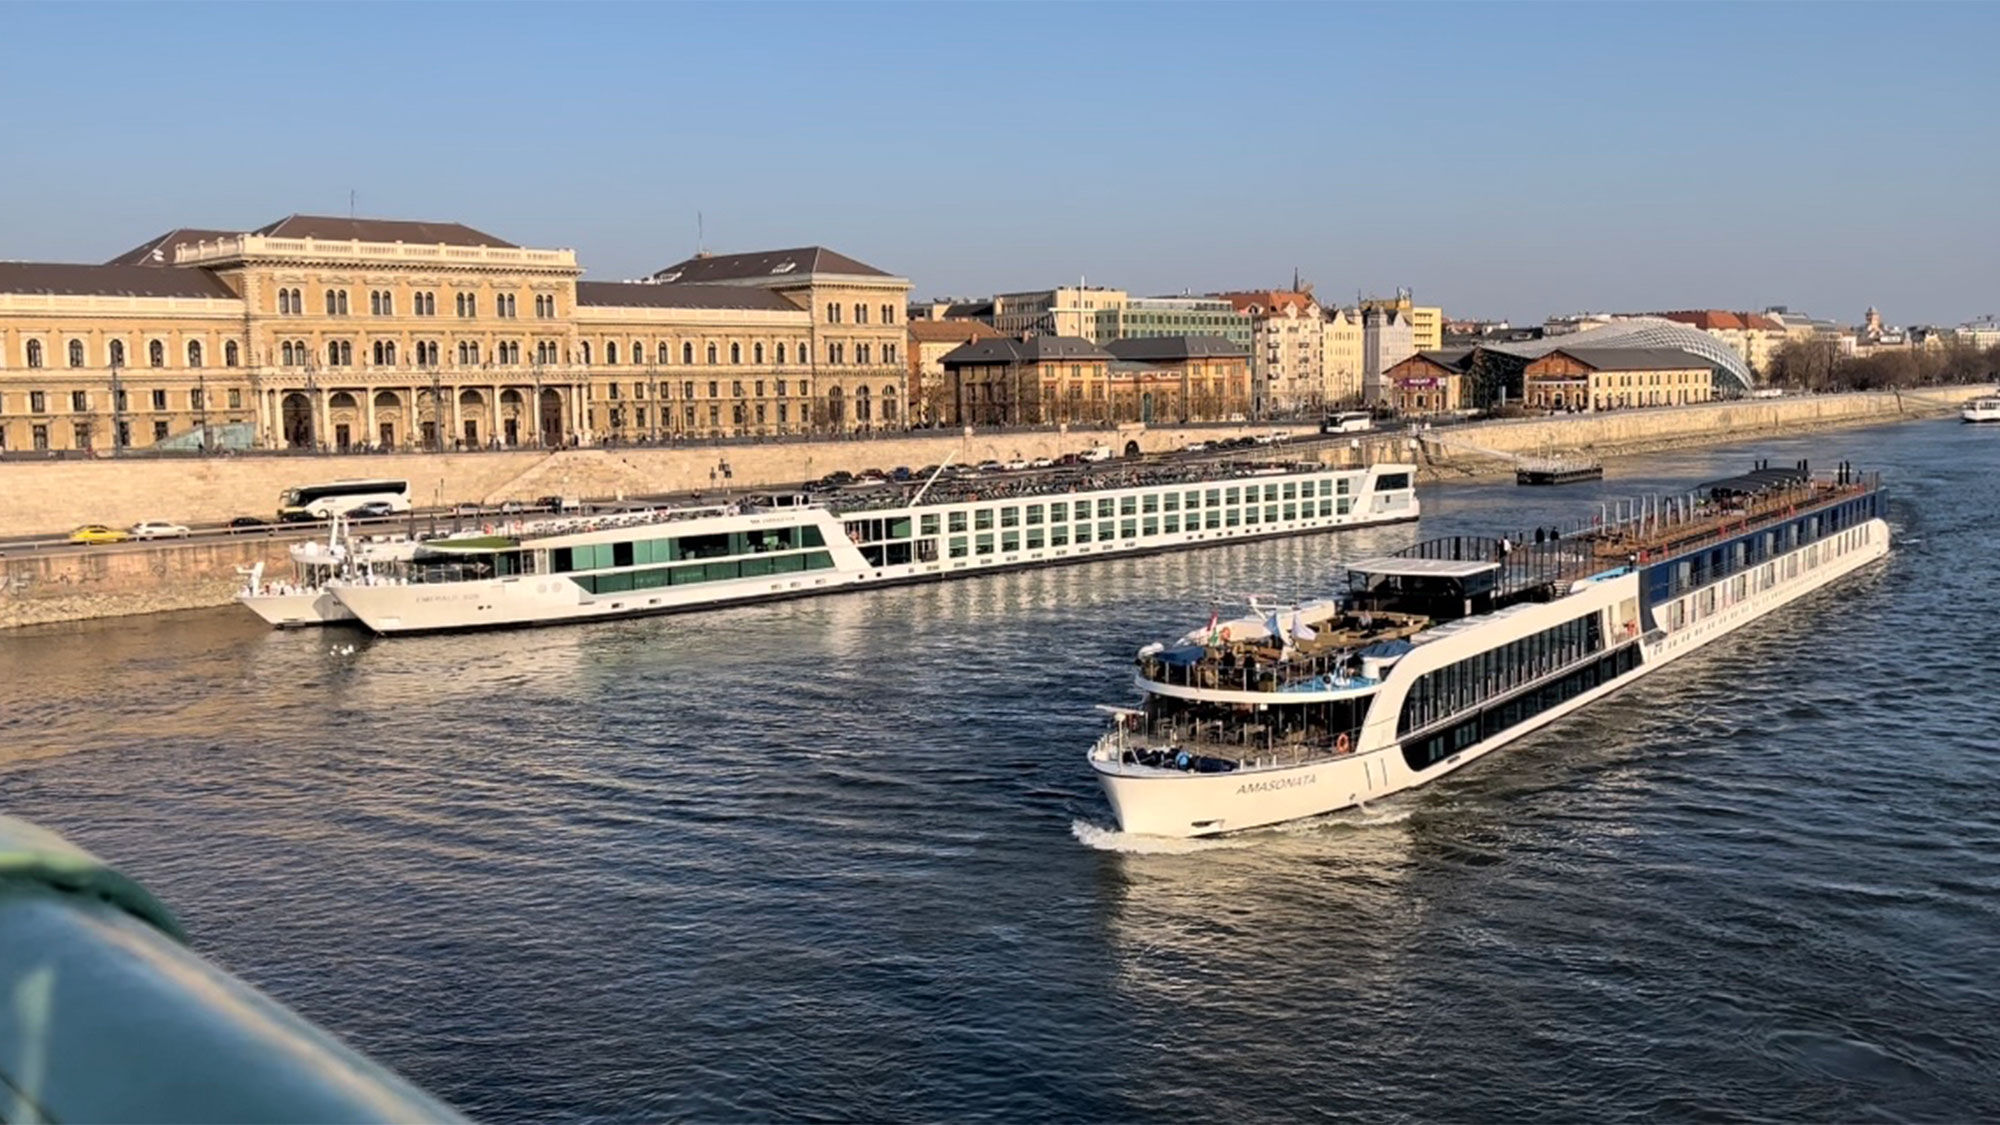 Emerald Cruises ships on the Danube seen from Liberty Bridge in Budapest during the first ASTA Global River Cruise Expo.